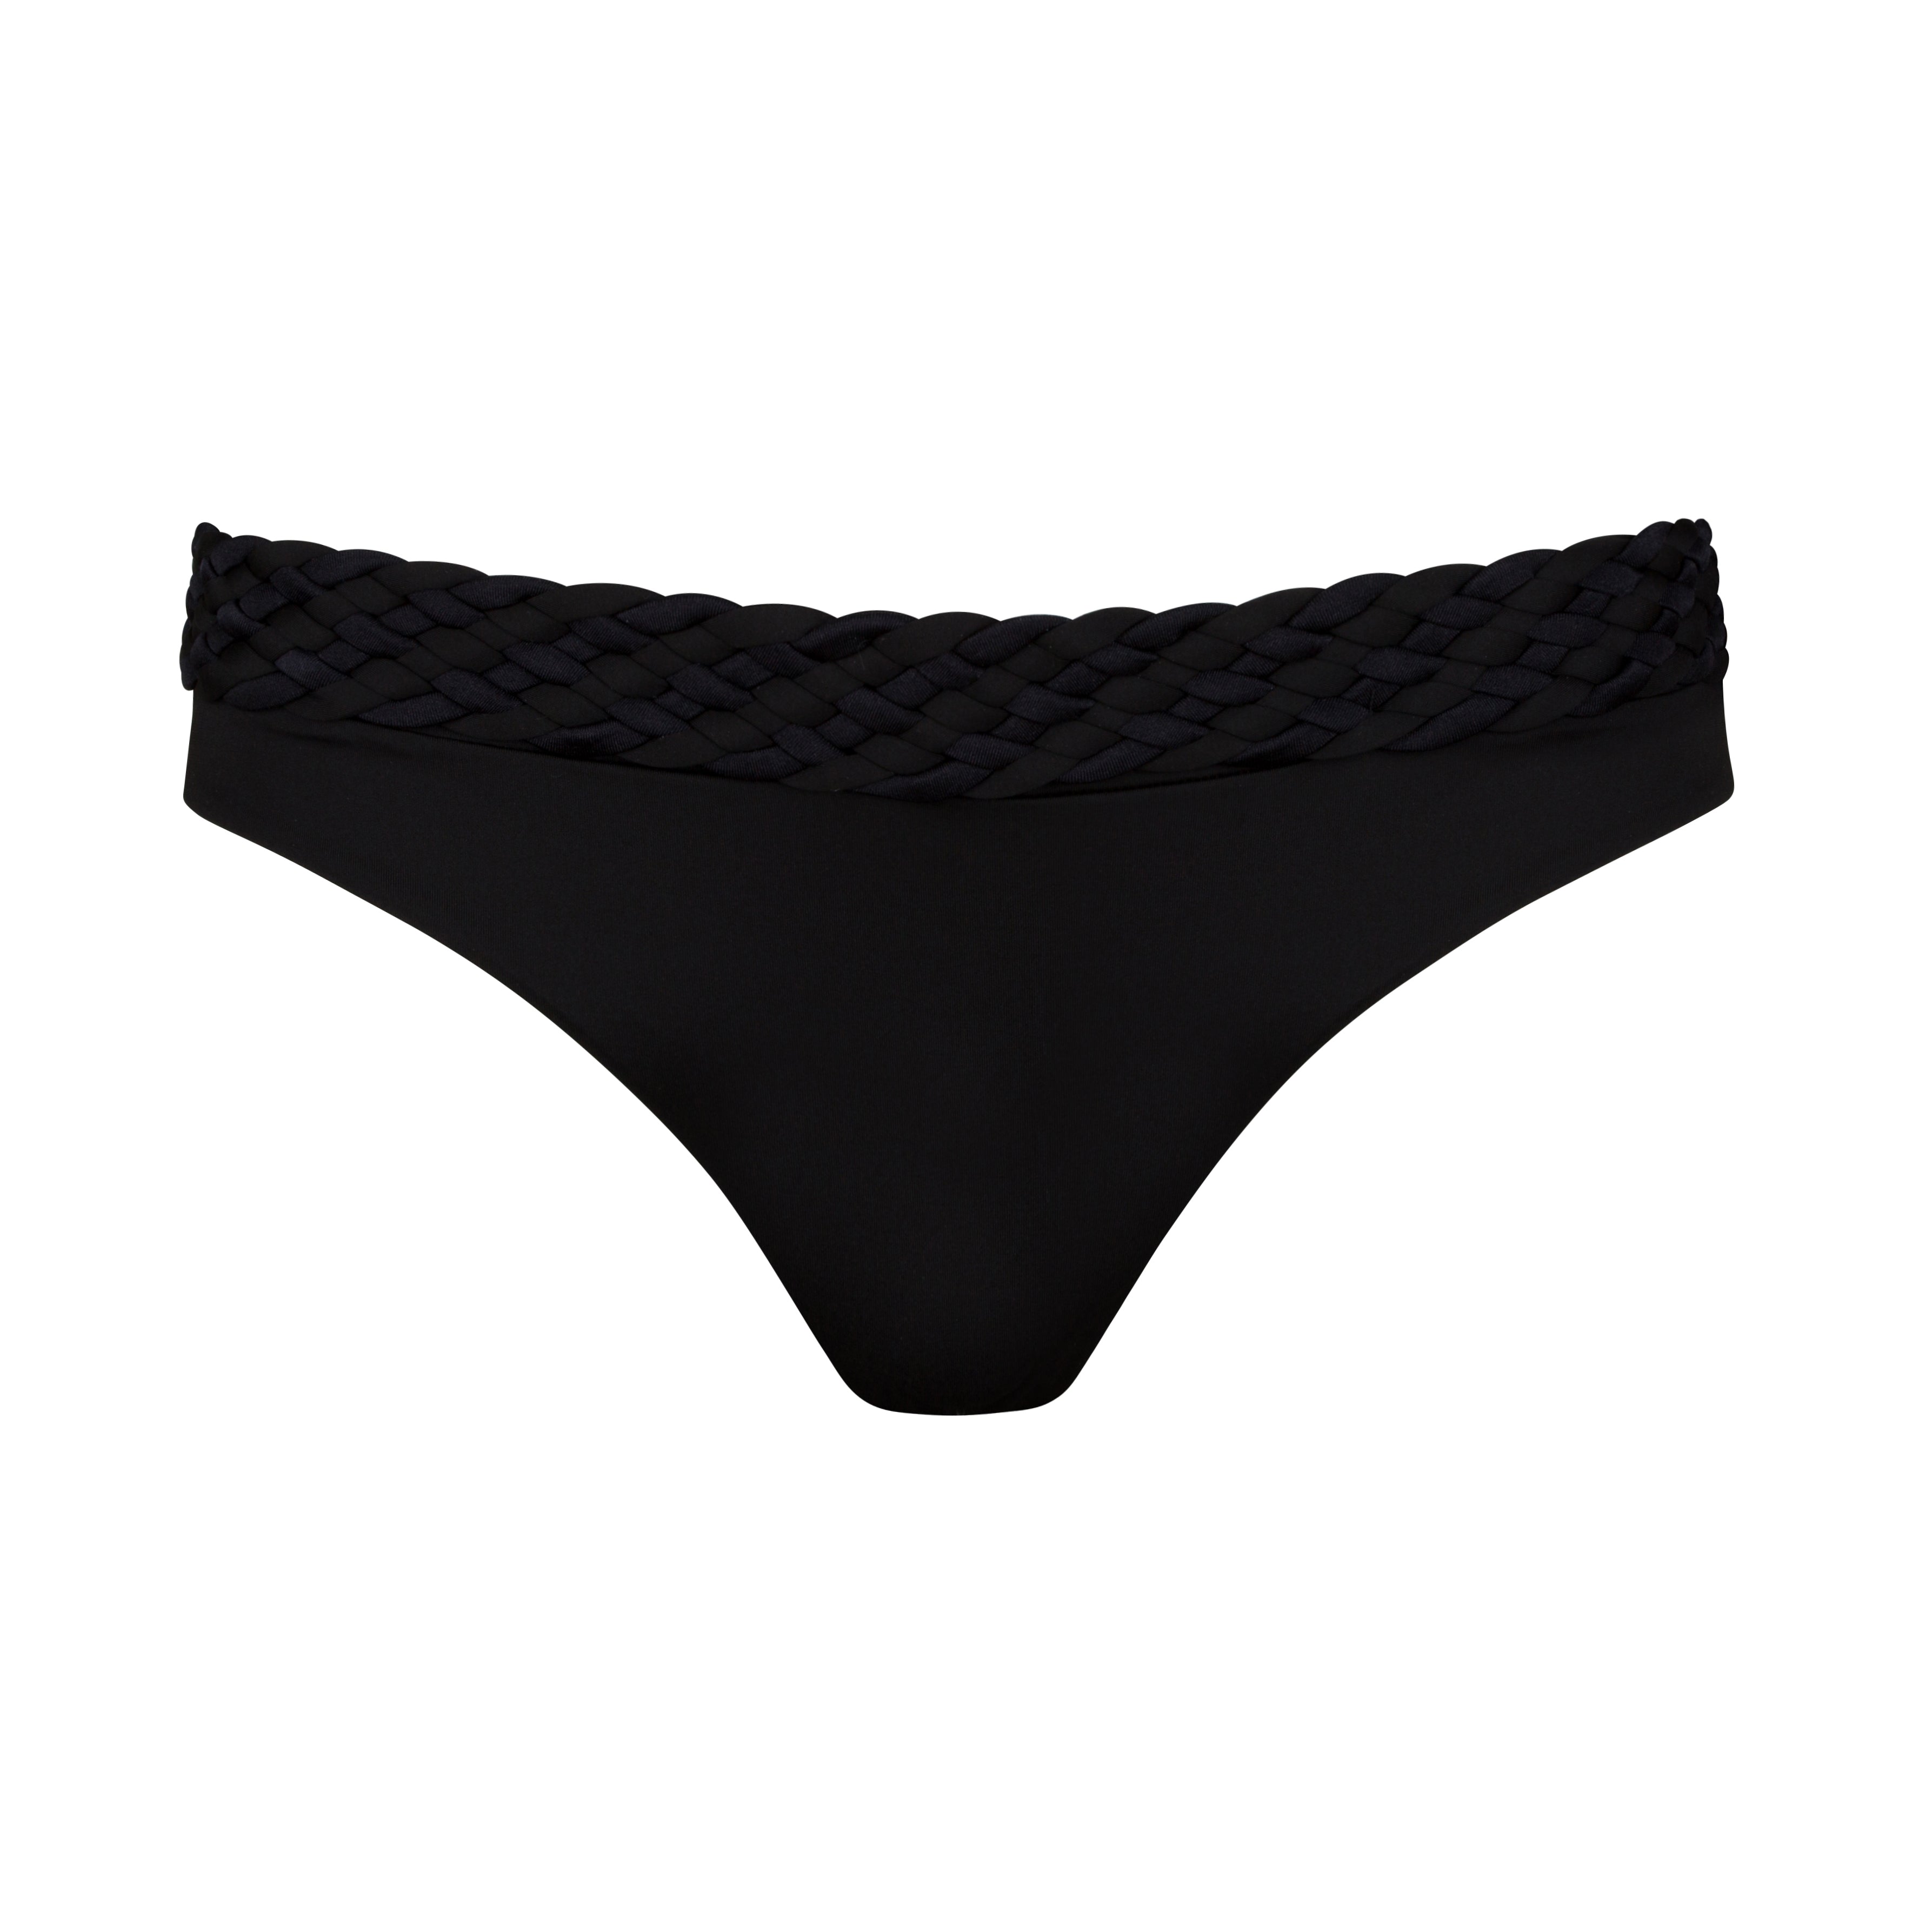 SOL BRIEF IN ONYX (modest coverage)